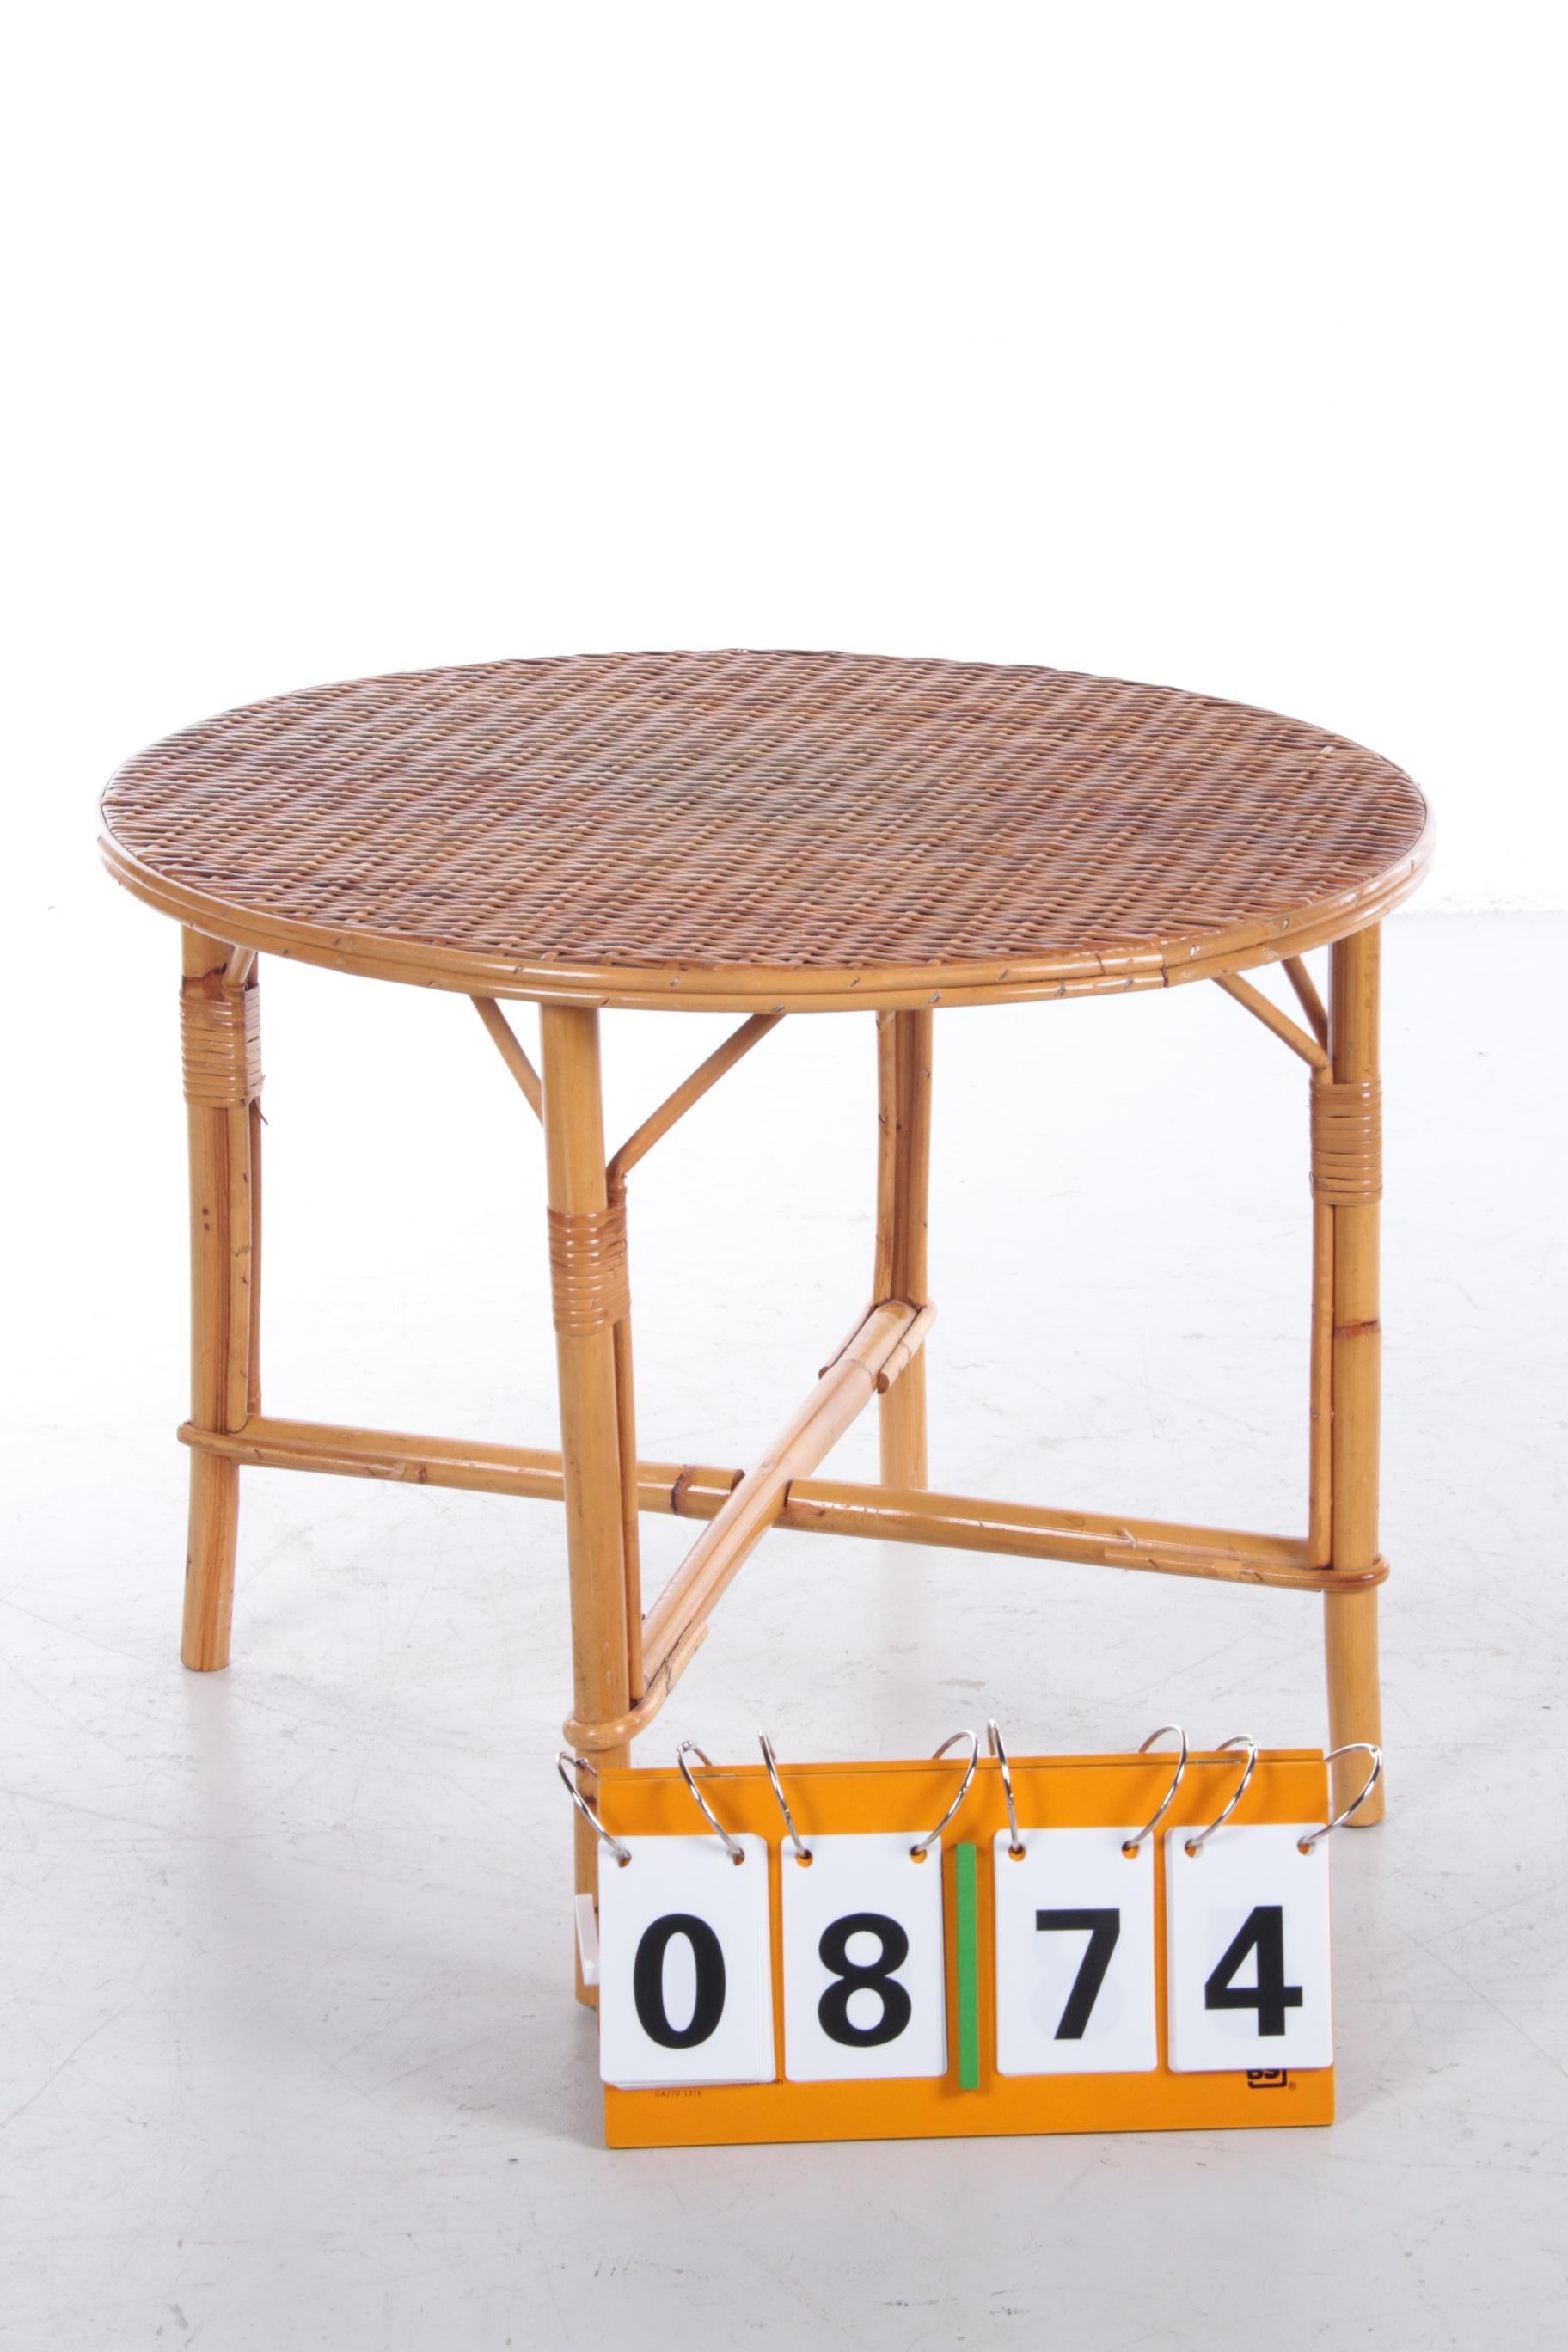 Bamboo Vintage Round Coffee Table Bohemian Style, 1960 For Sale